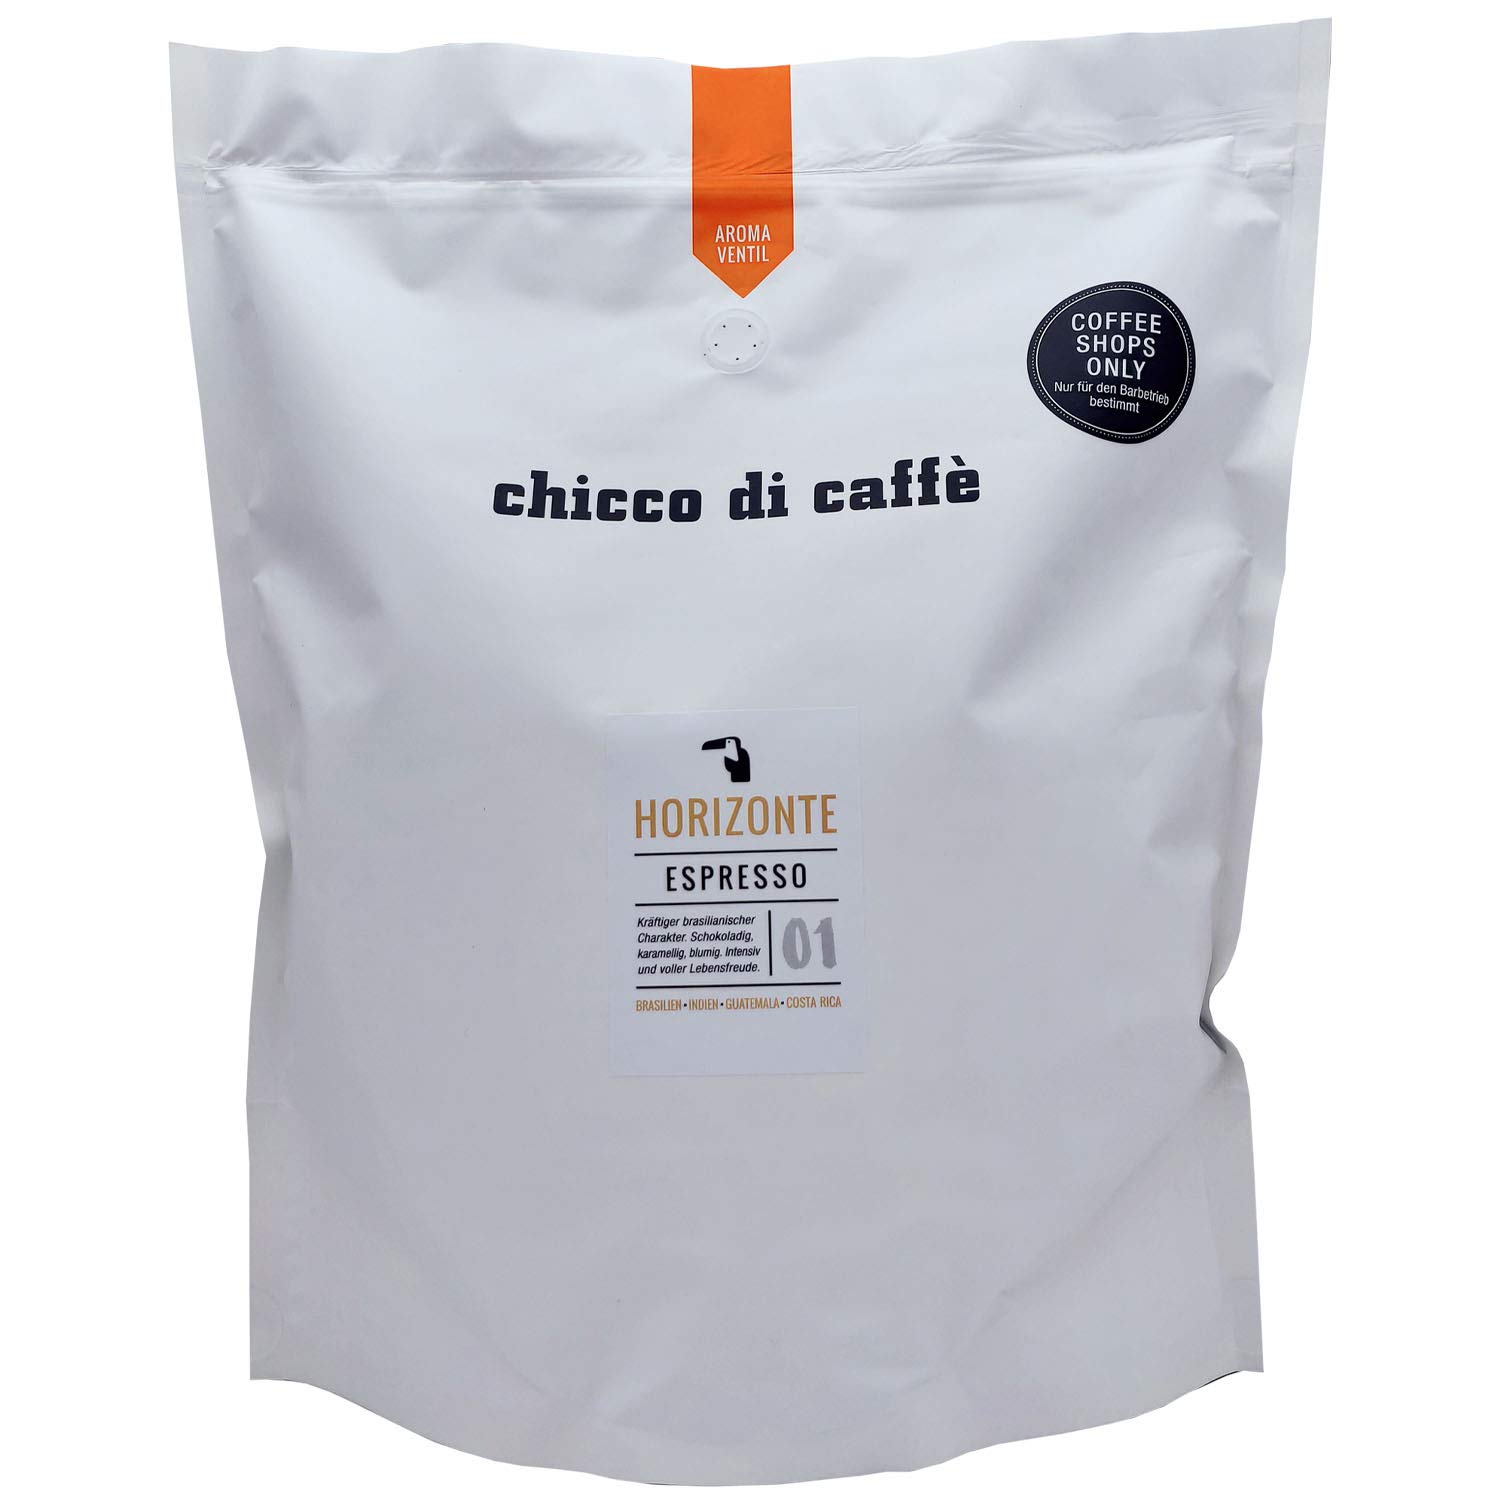 Chicco di Caffè | Espresso Horizonte | Whole coffee beans | 2.5 kg large packing | 70% Arabica - 30% Robusta | gently roasted